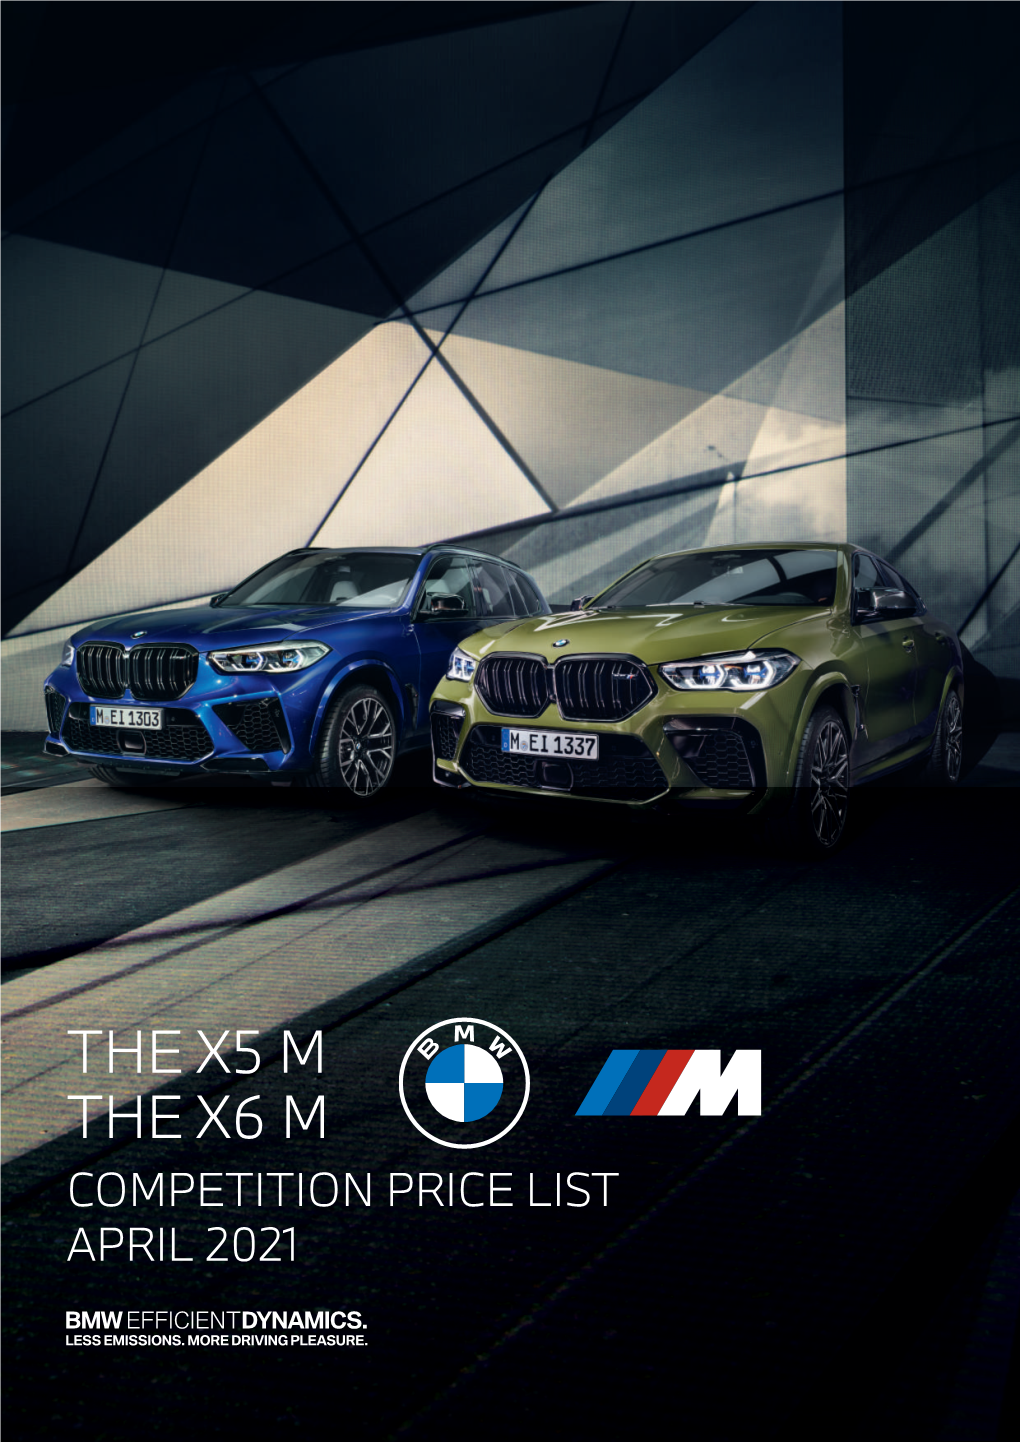 The New Bmw X5 M and X6 M Competition